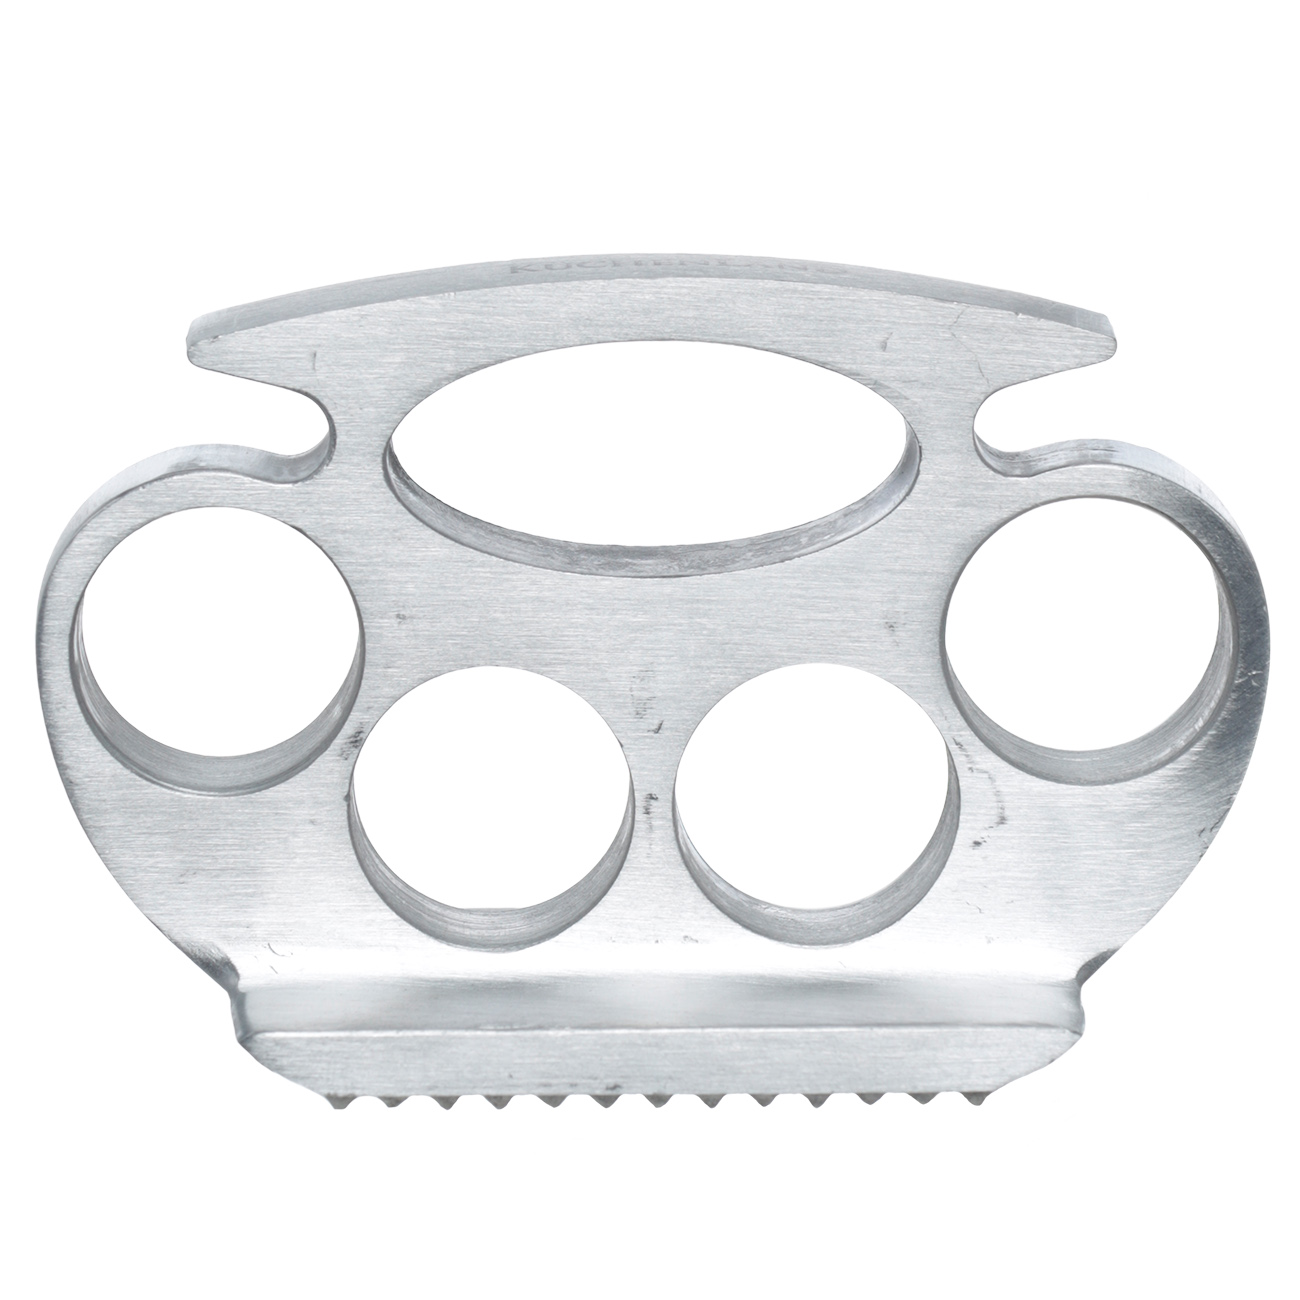 Brass knuckle hammer for chipping meat, 11x7 cm, steel, BBQ изображение № 4